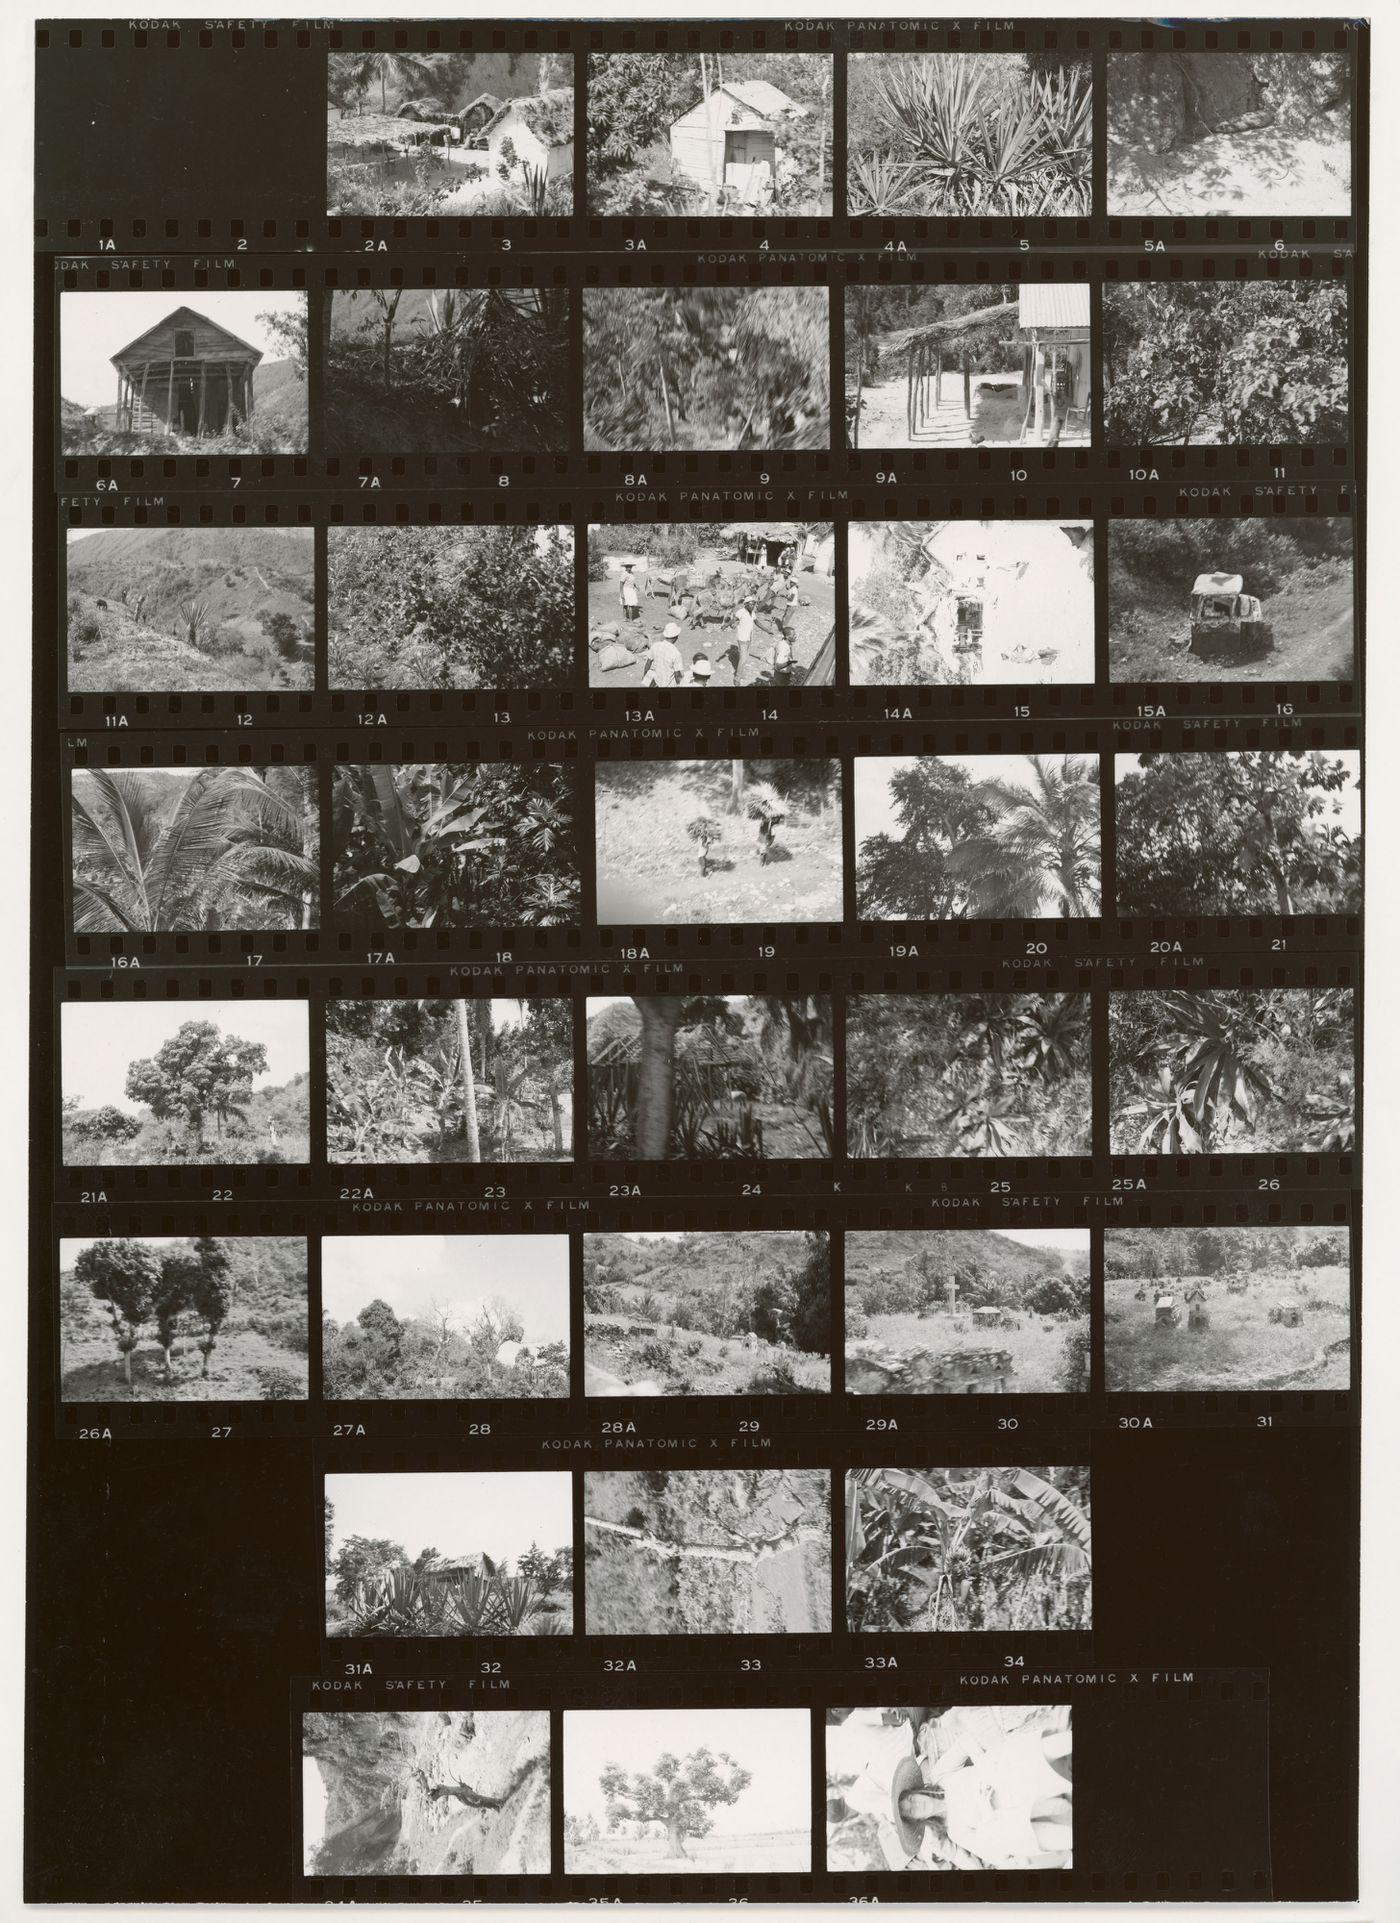 Contact sheet of buildings, landscape views and people, Haiti